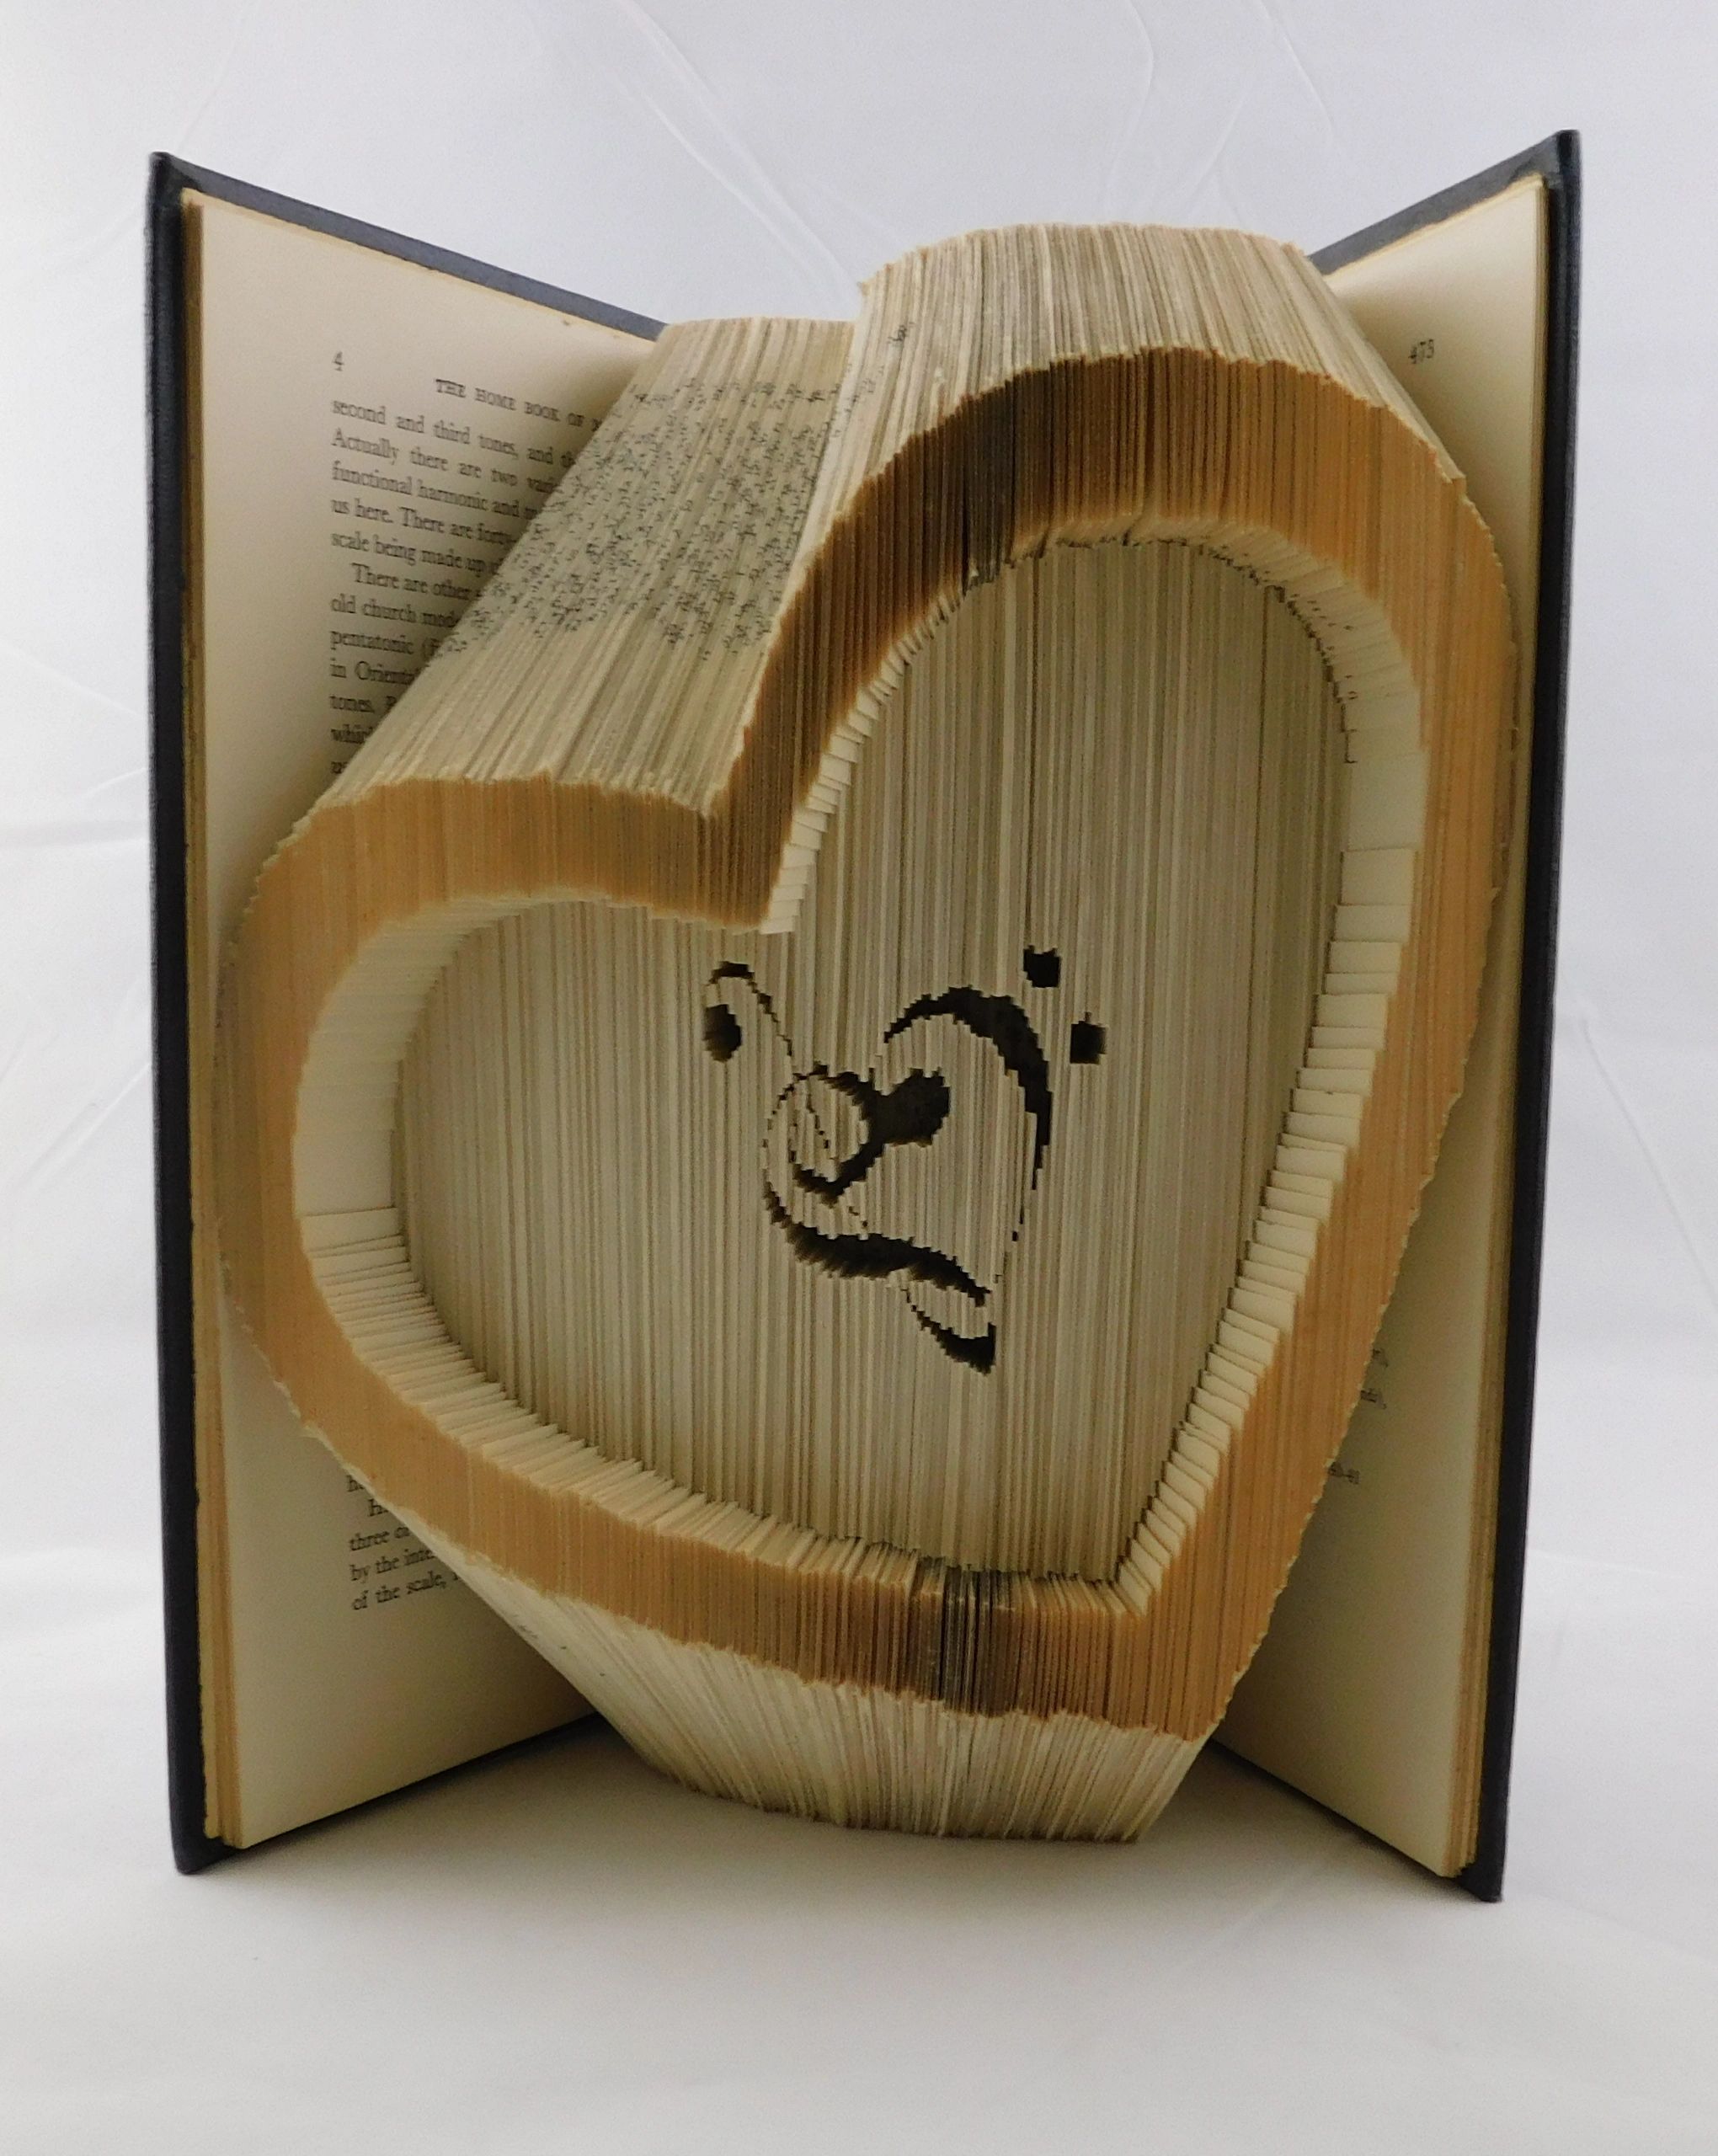 A tilted heart folded from the pages of a rescued book with a musical heart within it.